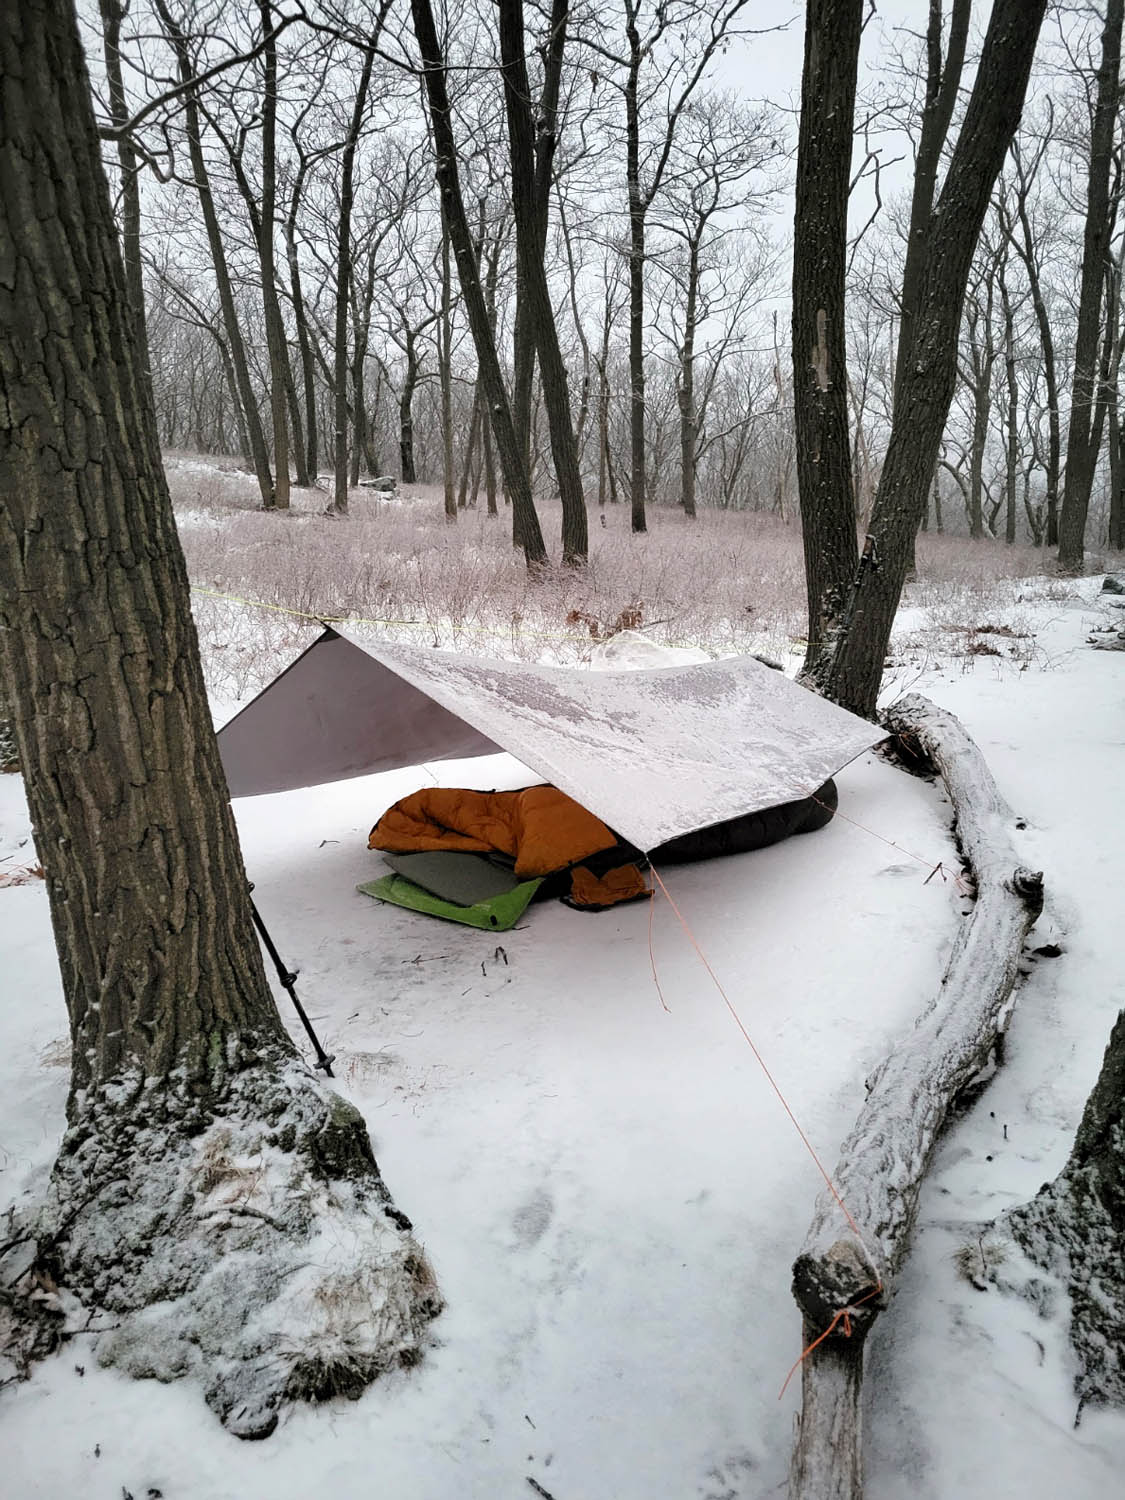 Morning winter camp with dusting of snow